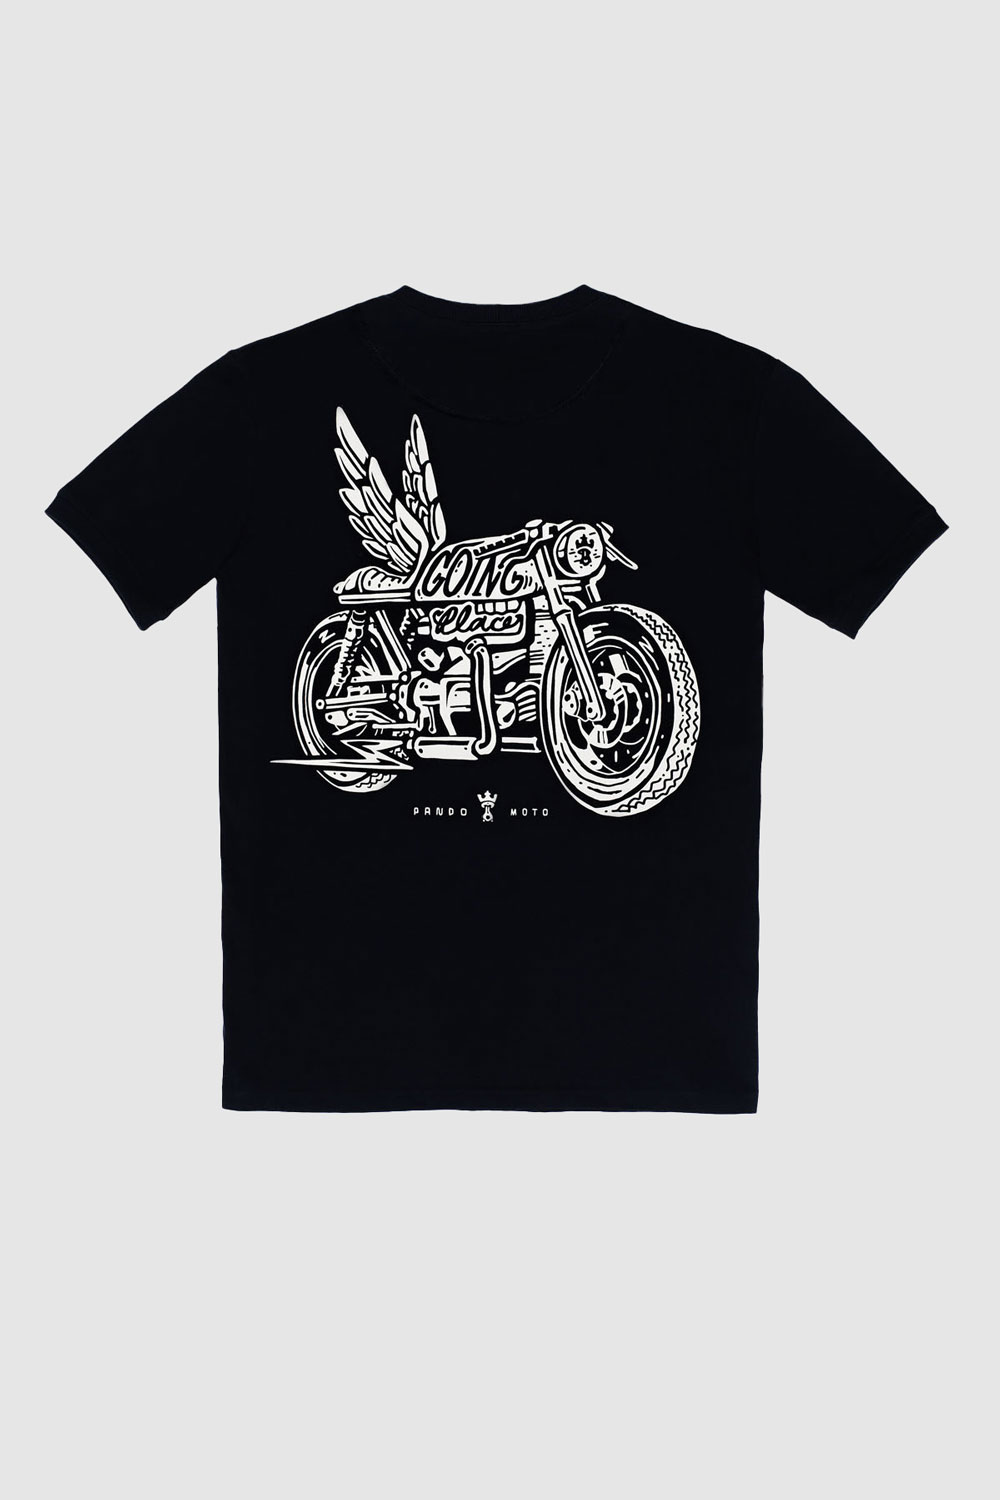 MIKE MOTO WING 1 - T-Shirt for bikers Regular Fit, Unisex 1